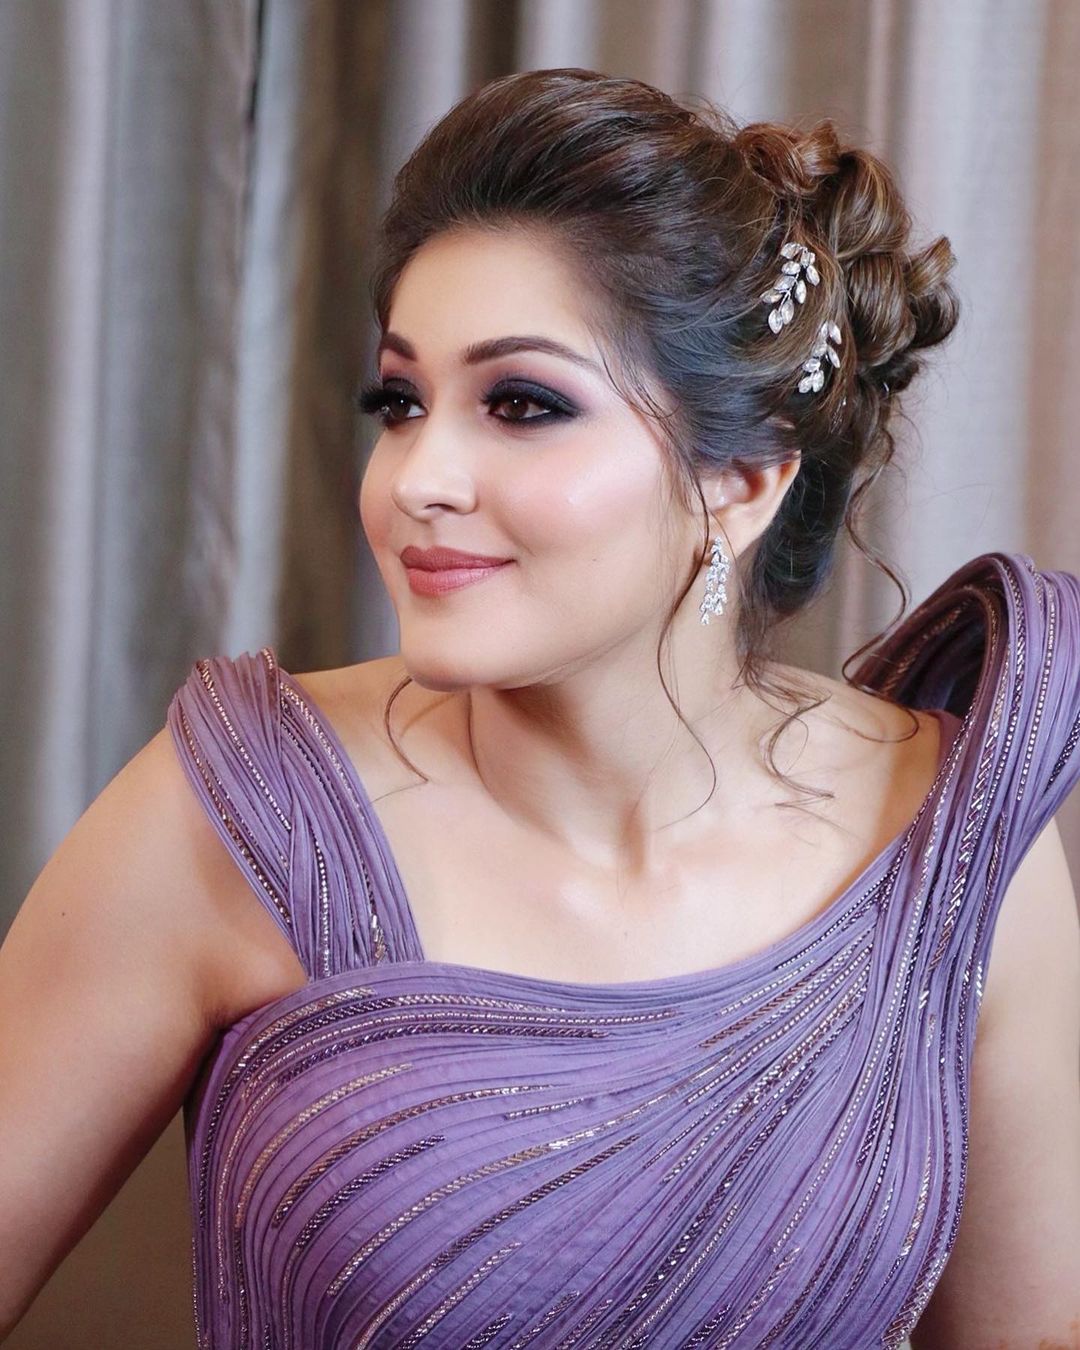 Satin Skin Engagement Makeup Look in Gown-latest engagement look for bride